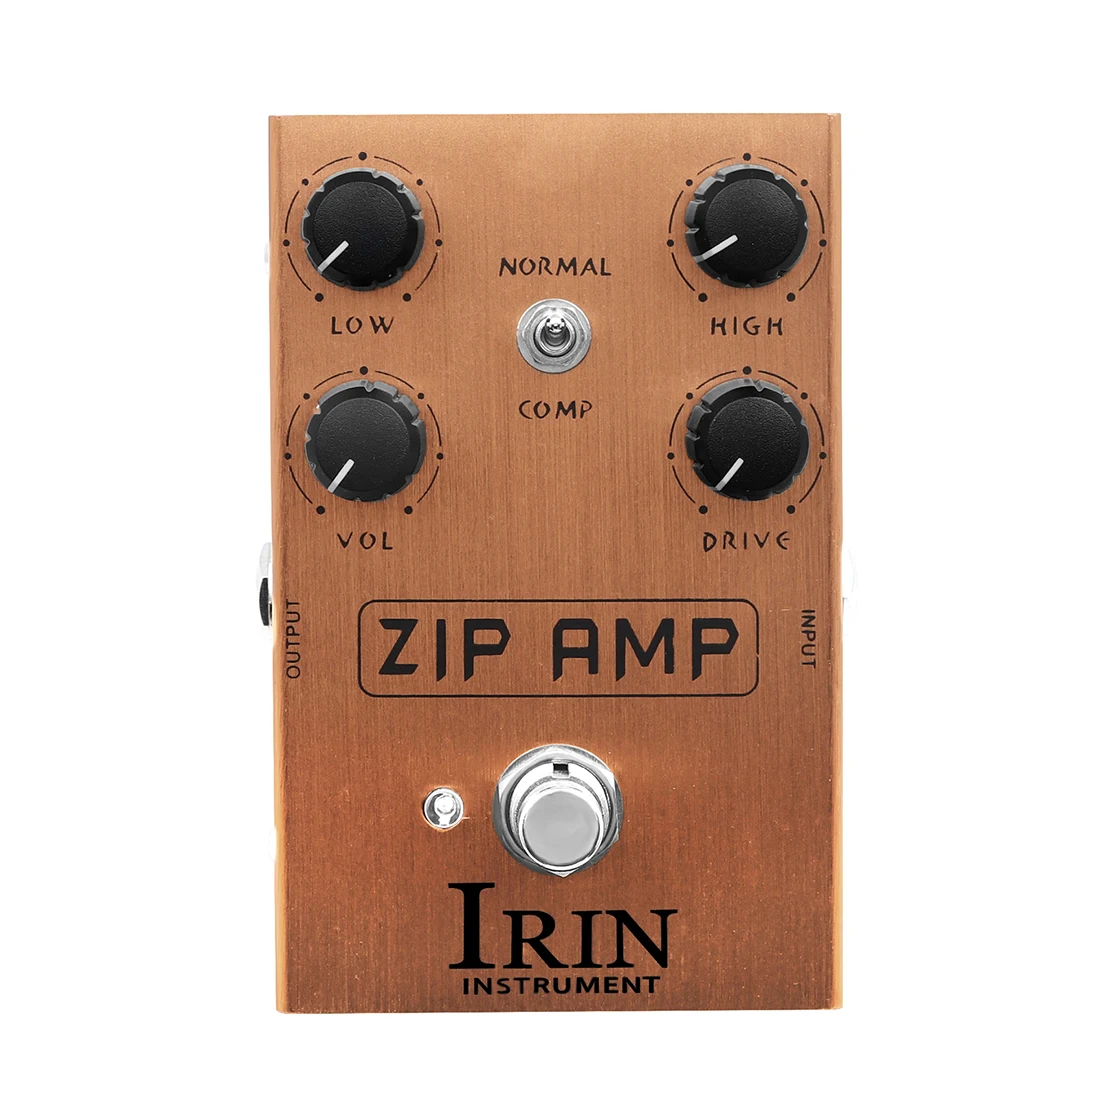 

IRIN AN-39 ZIP AMP Strong Compression Overdrive Tone Guitar Pedal with COMP Toggle Switch for Electric Guitar Effects Pedal